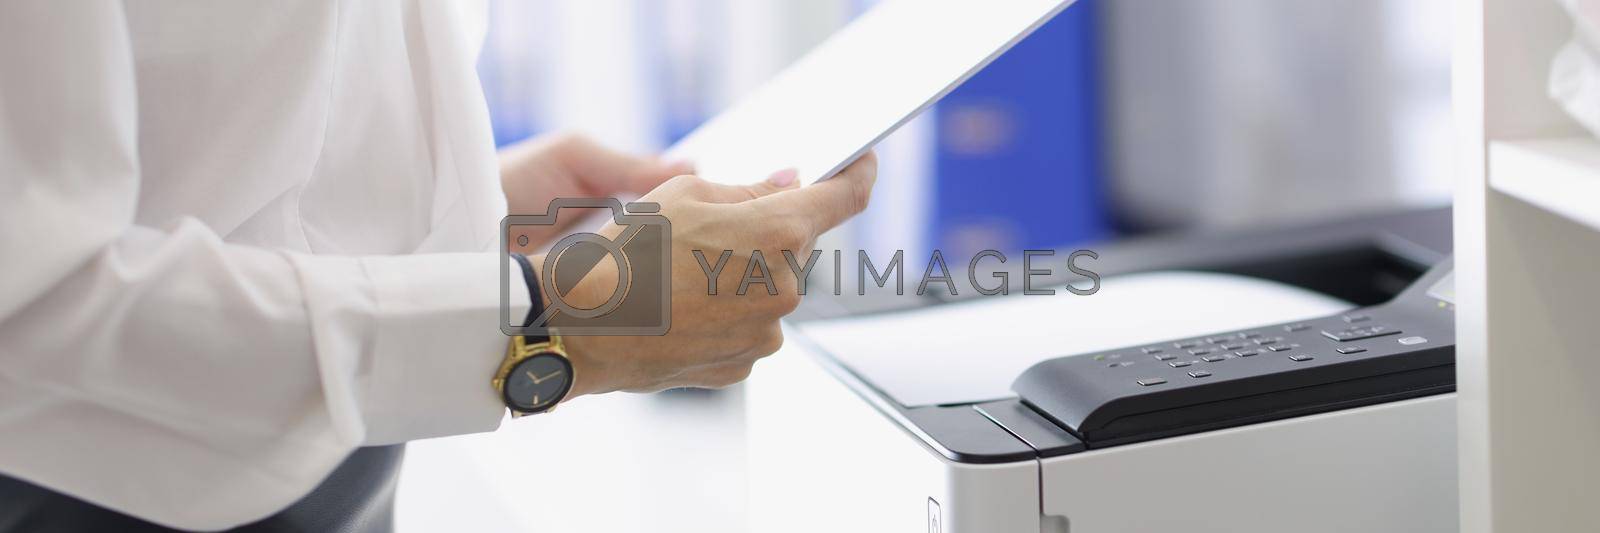 Royalty free image of Woman working with papers in office by kuprevich